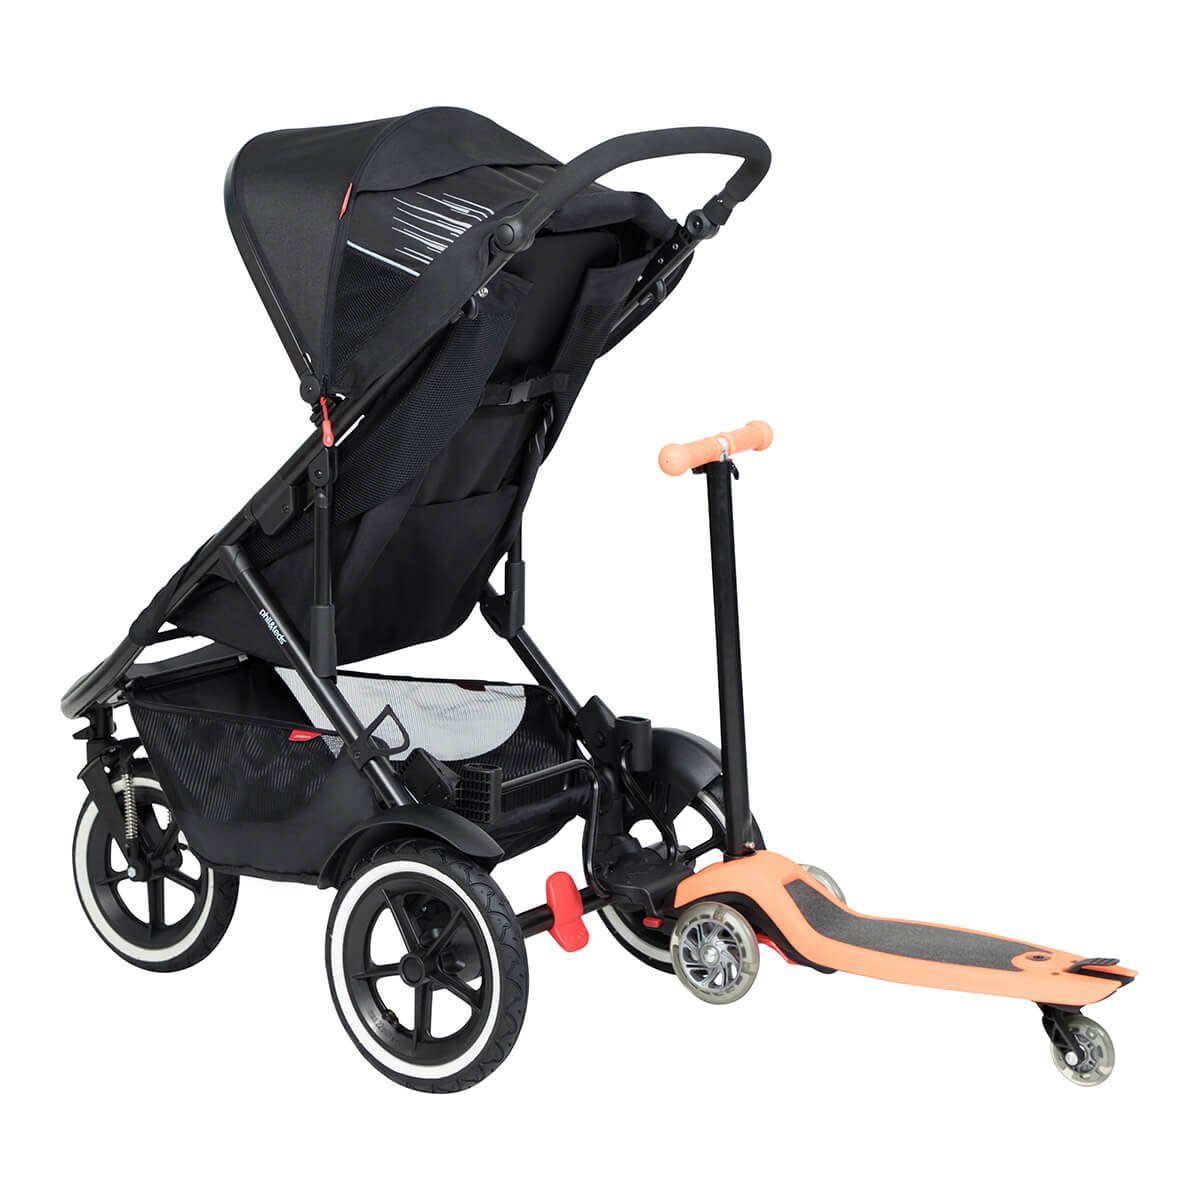 https://cdn.accentuate.io/7535981887682/19466204315842/philteds-sport-buggy-with-freerider-stroller-board-in-rear-v1664490661463.jpg?1200x1200